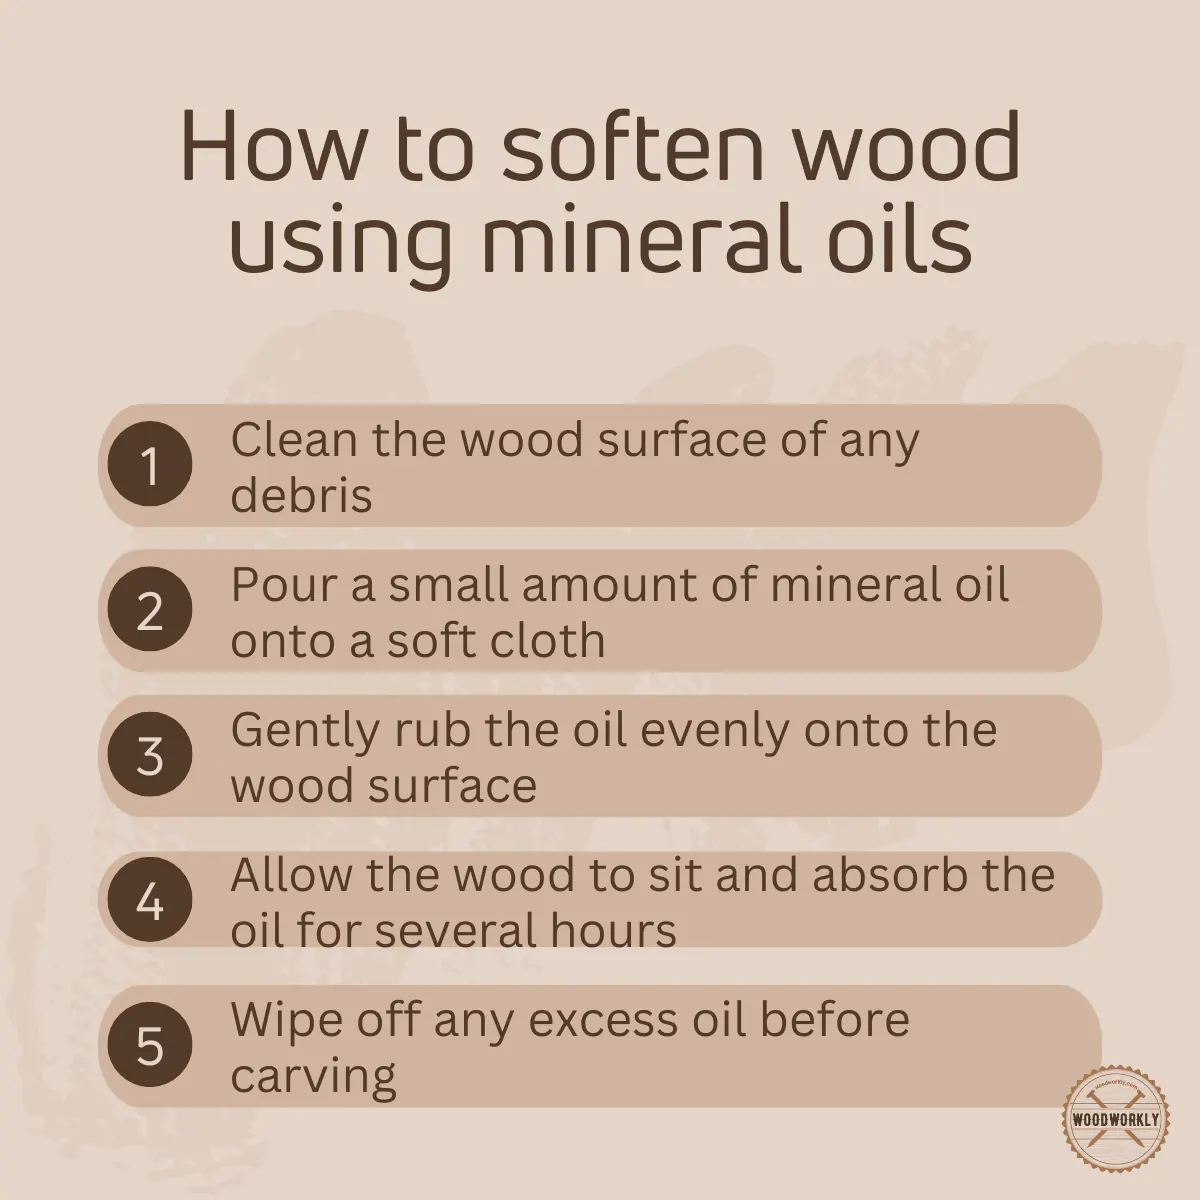 How to soften wood using mineral oils